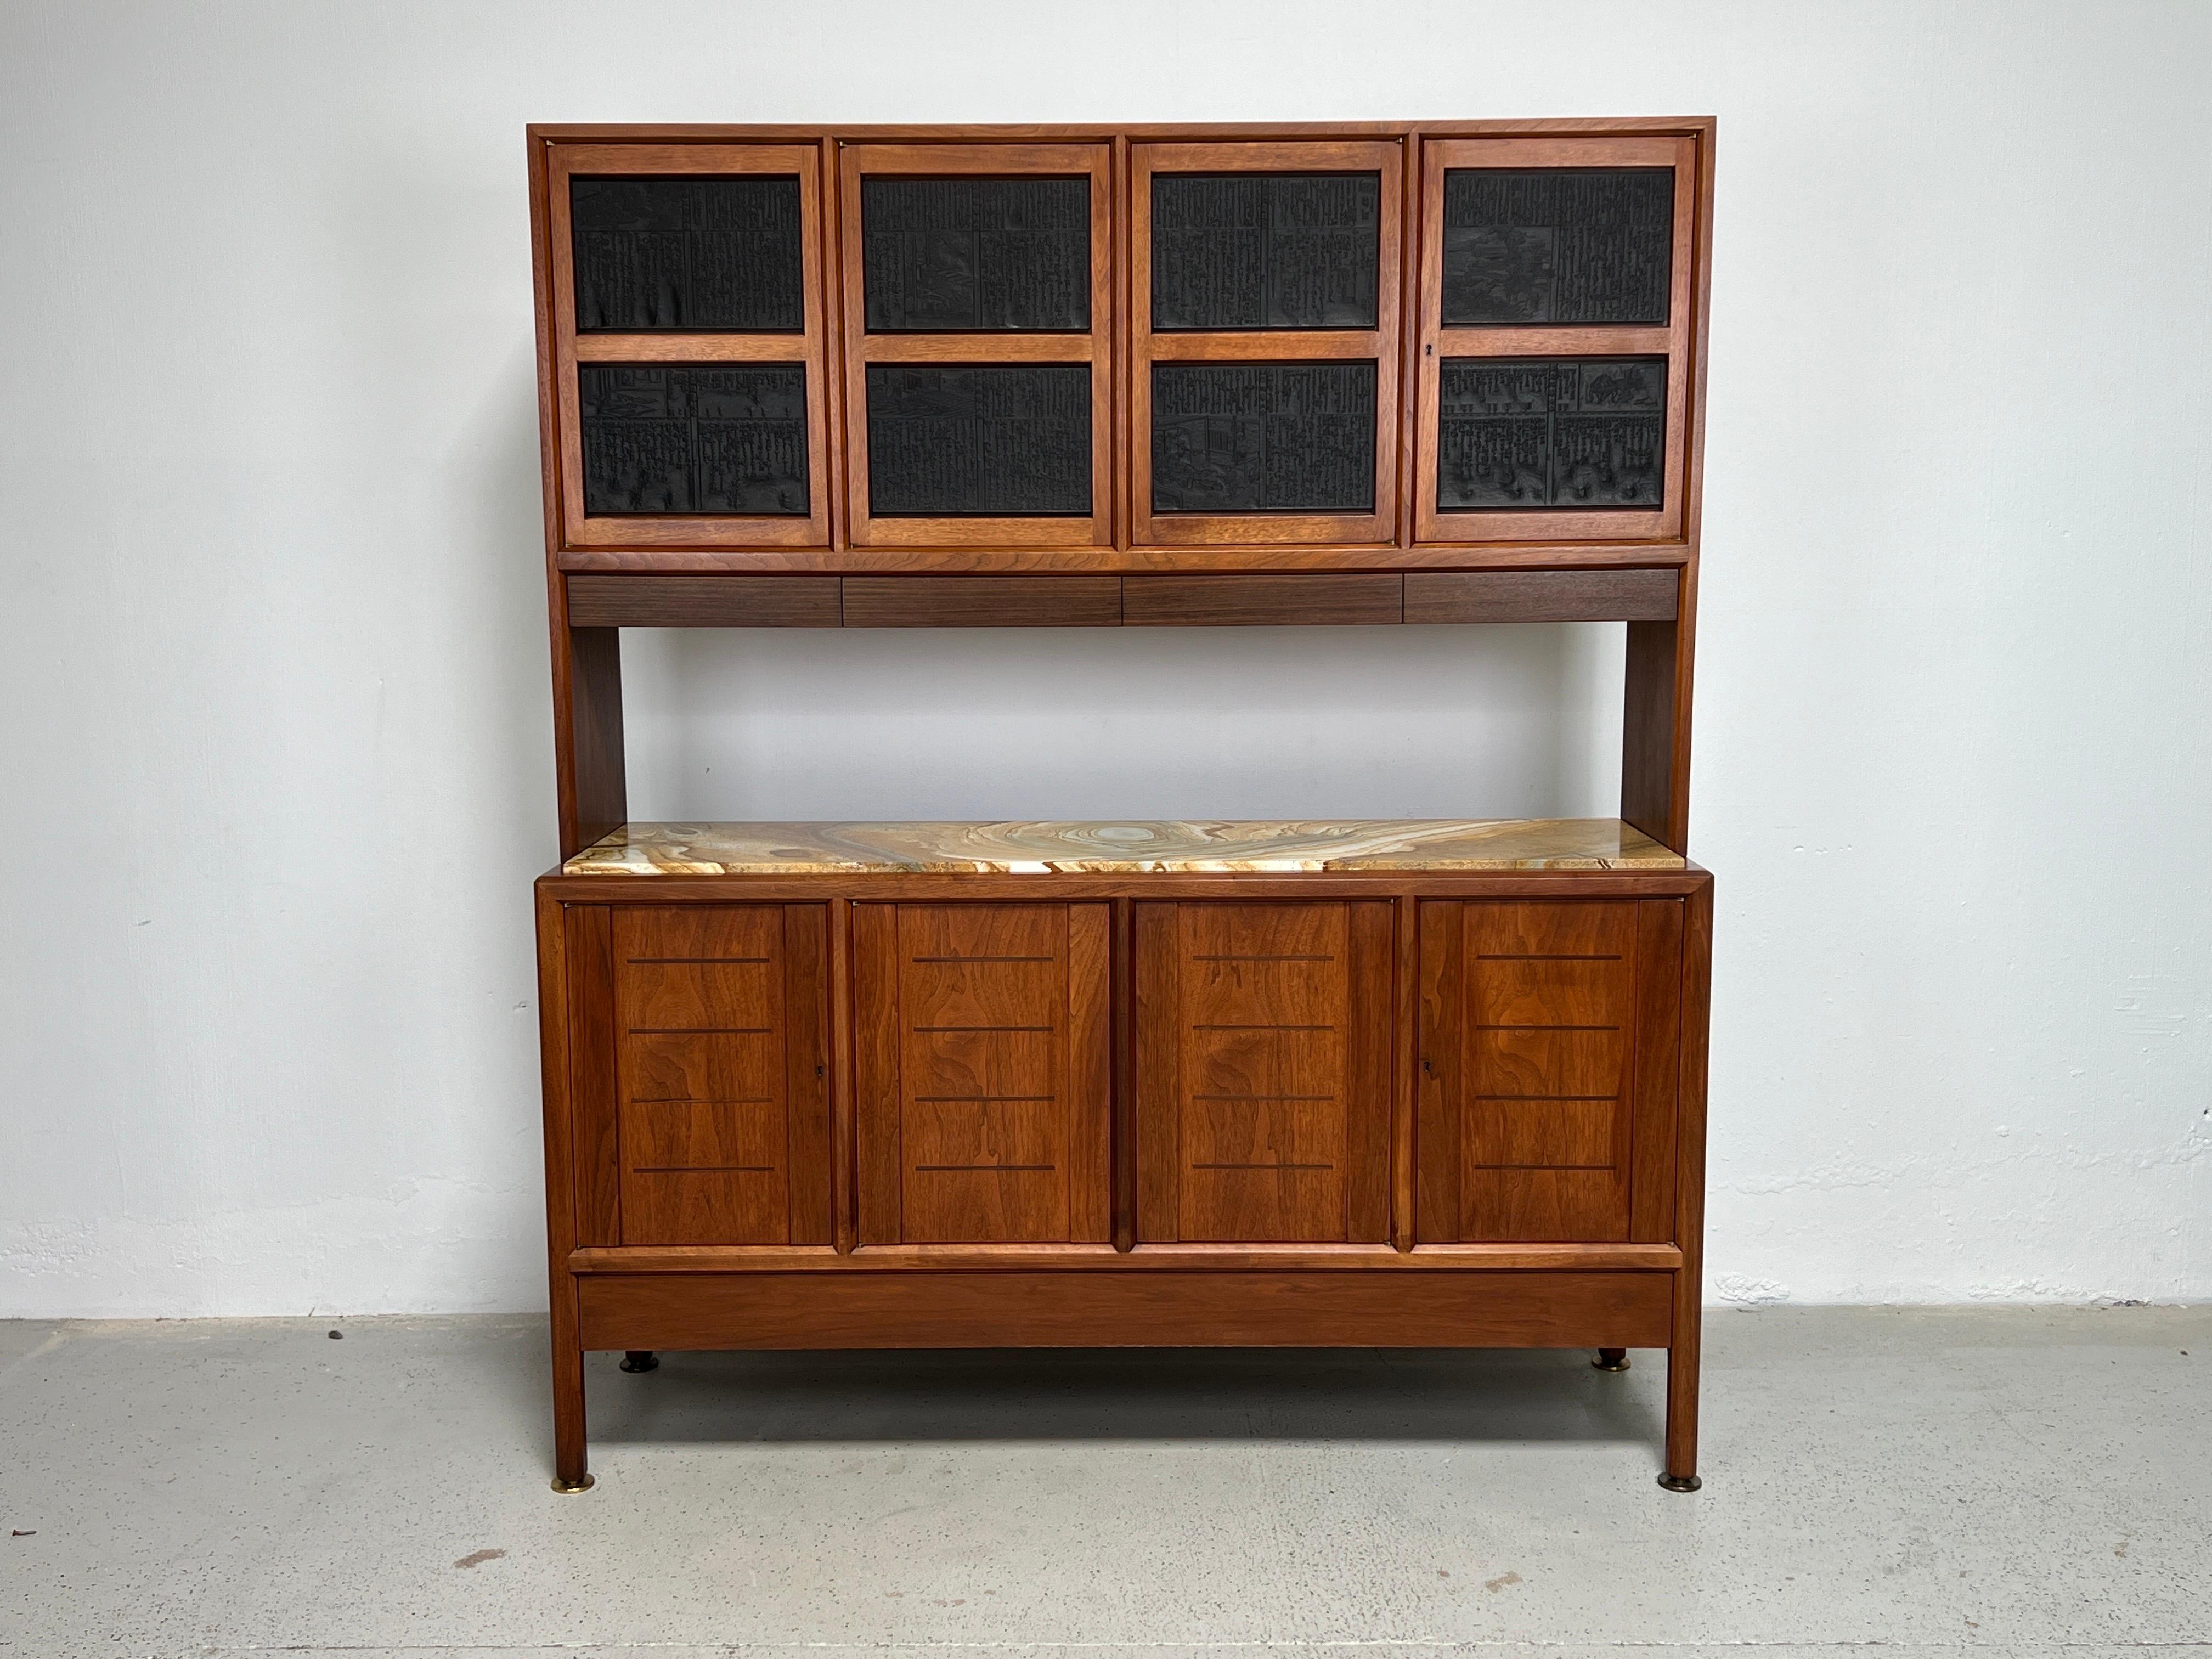 A rare and refined two piece cabinet designed by Edward Wormley for Dunbar. The top portion has inset antique Chinese printing blocks with a row of Rosewood drawers underneath. The bottom cabinet is walnut with inlayed mahogany details and inset